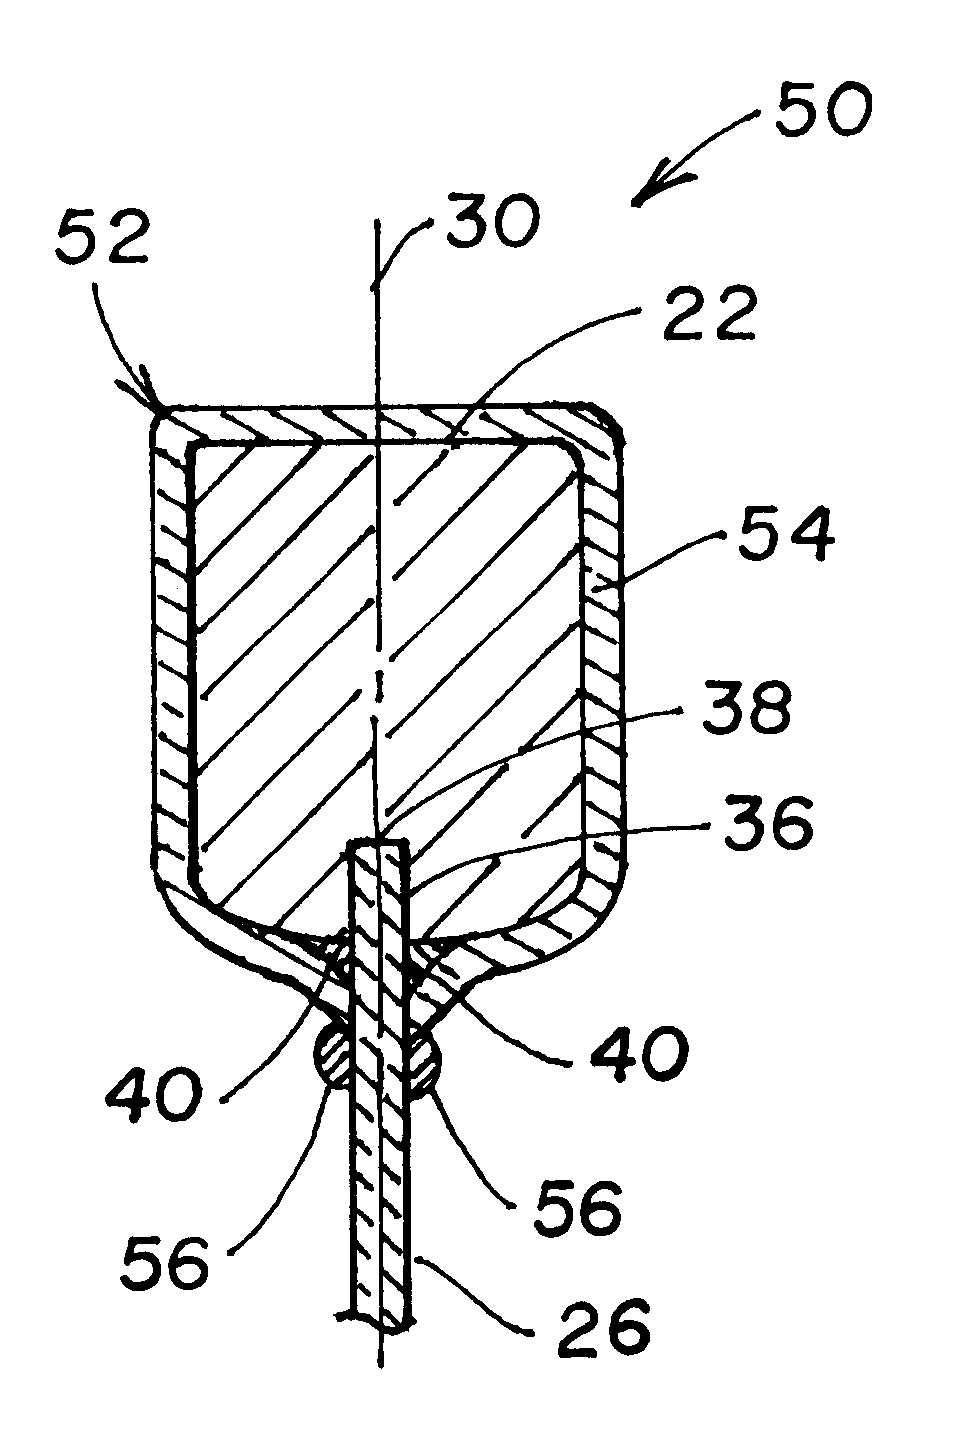 Steel-clad cathode for electrolytic refining of copper